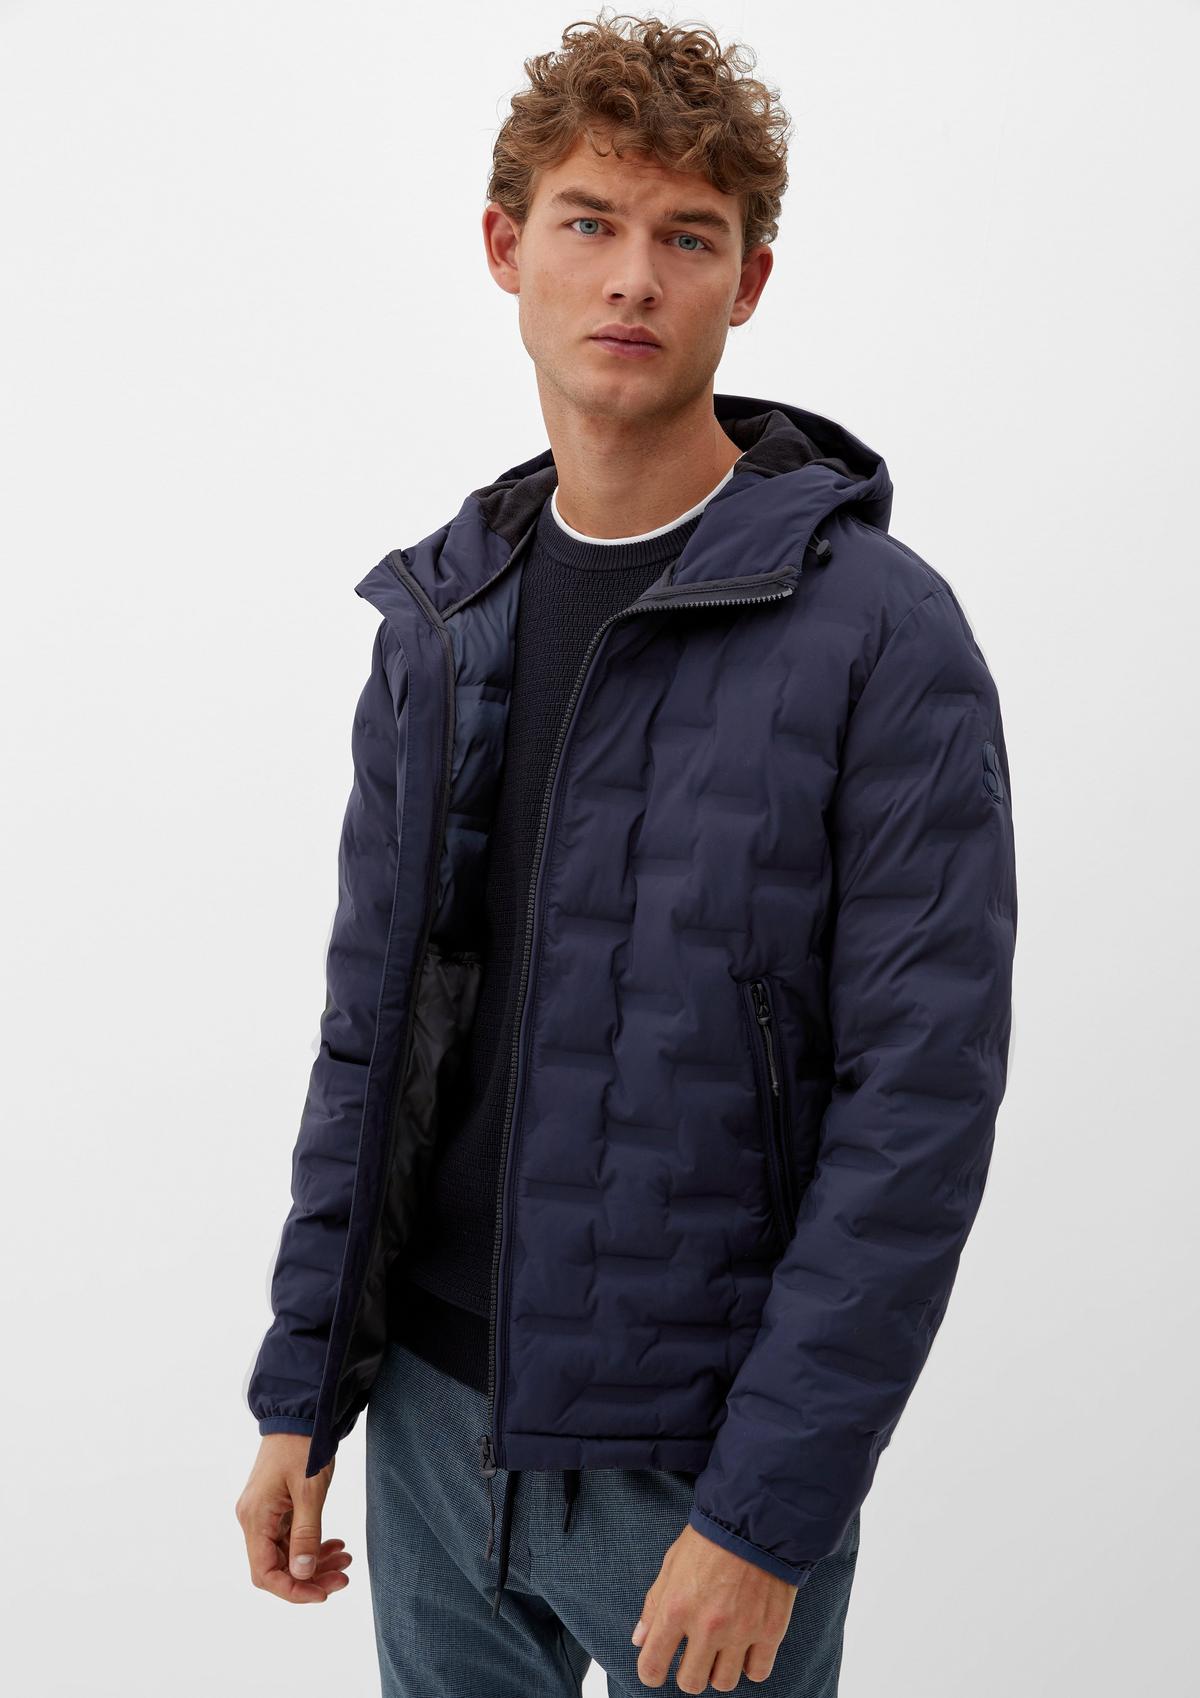 Softshell jacket with a stand-up collar - navy